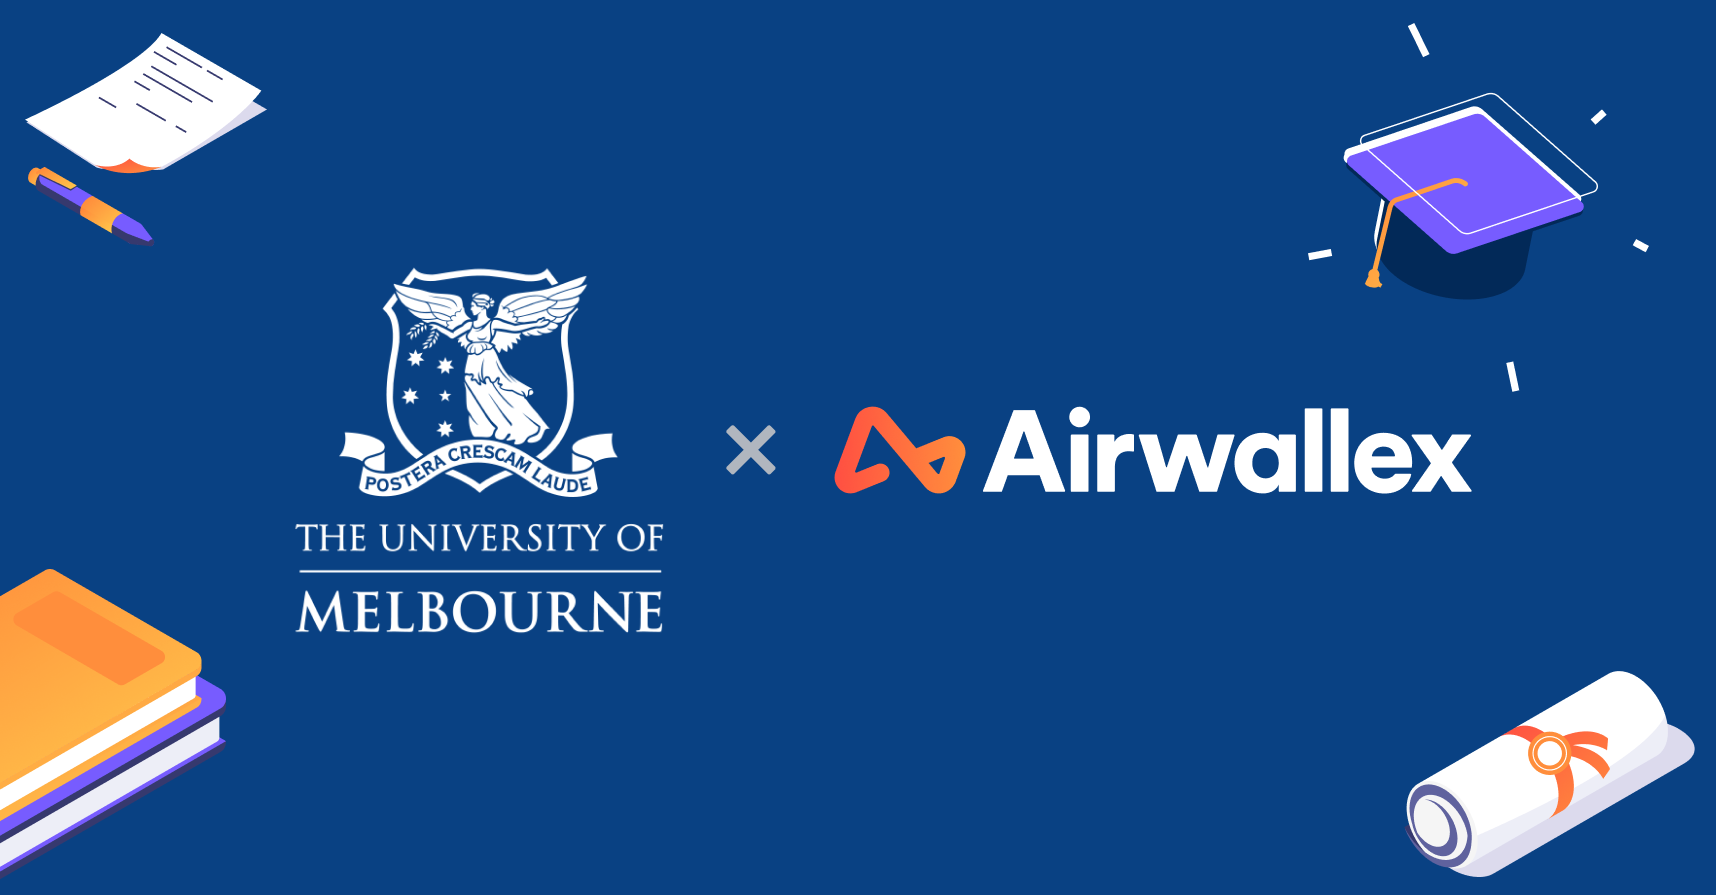 Airwallex partners with University of Melbourne to forge Australia’s future tech leaders